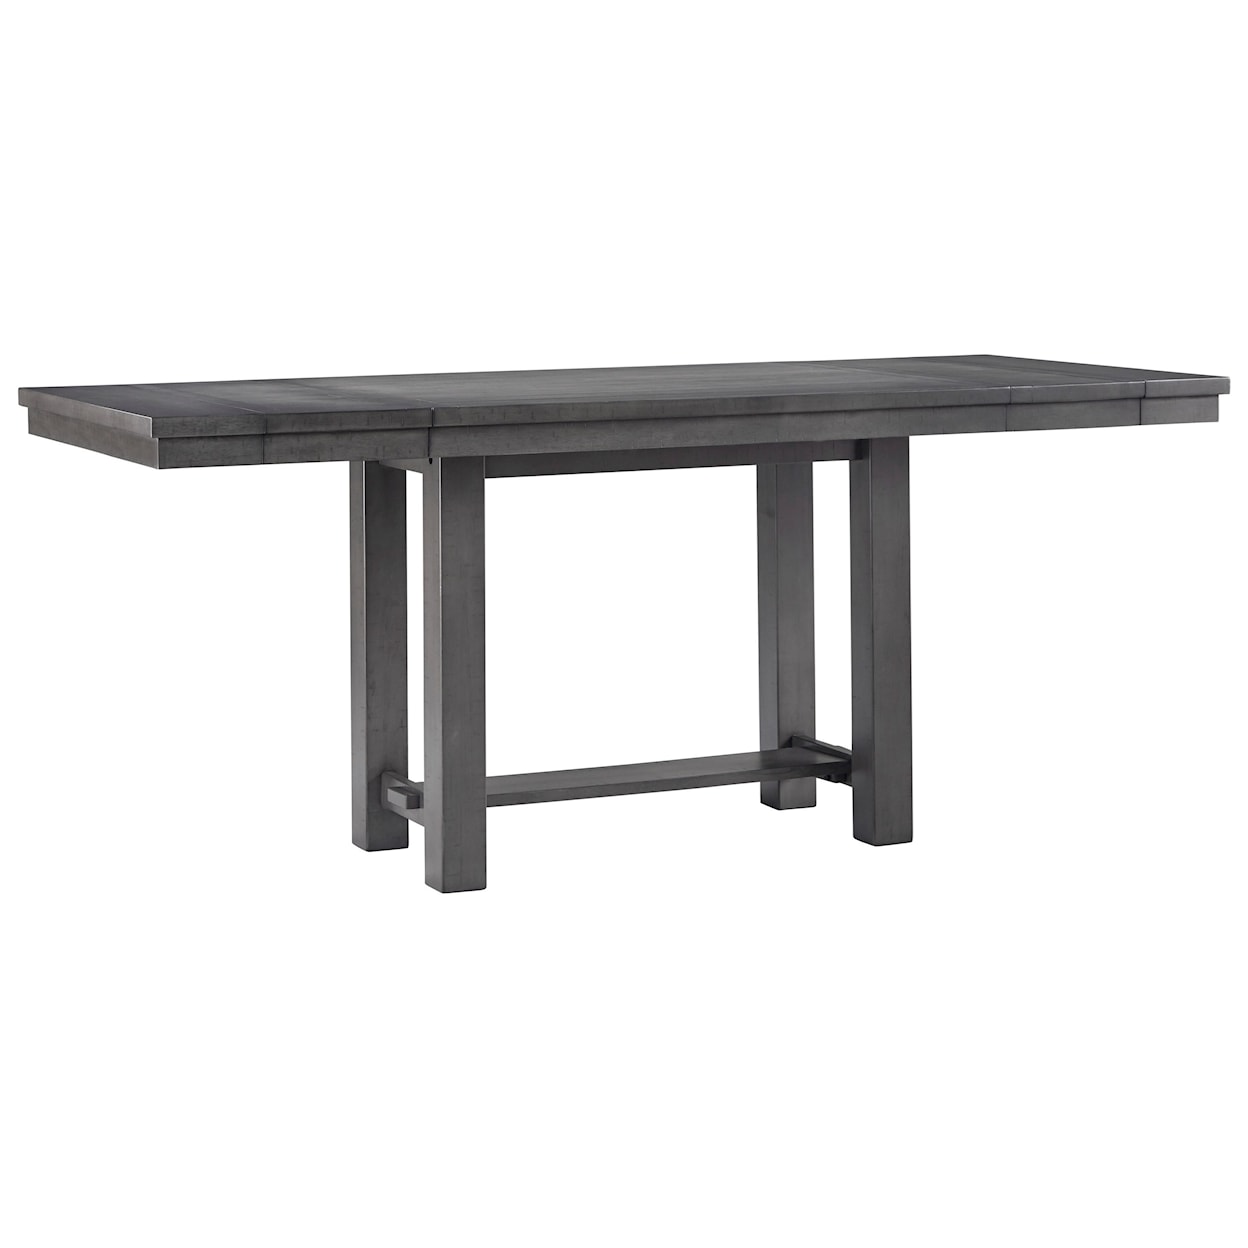 Benchcraft Myshanna Counter Height Dining Extension Table